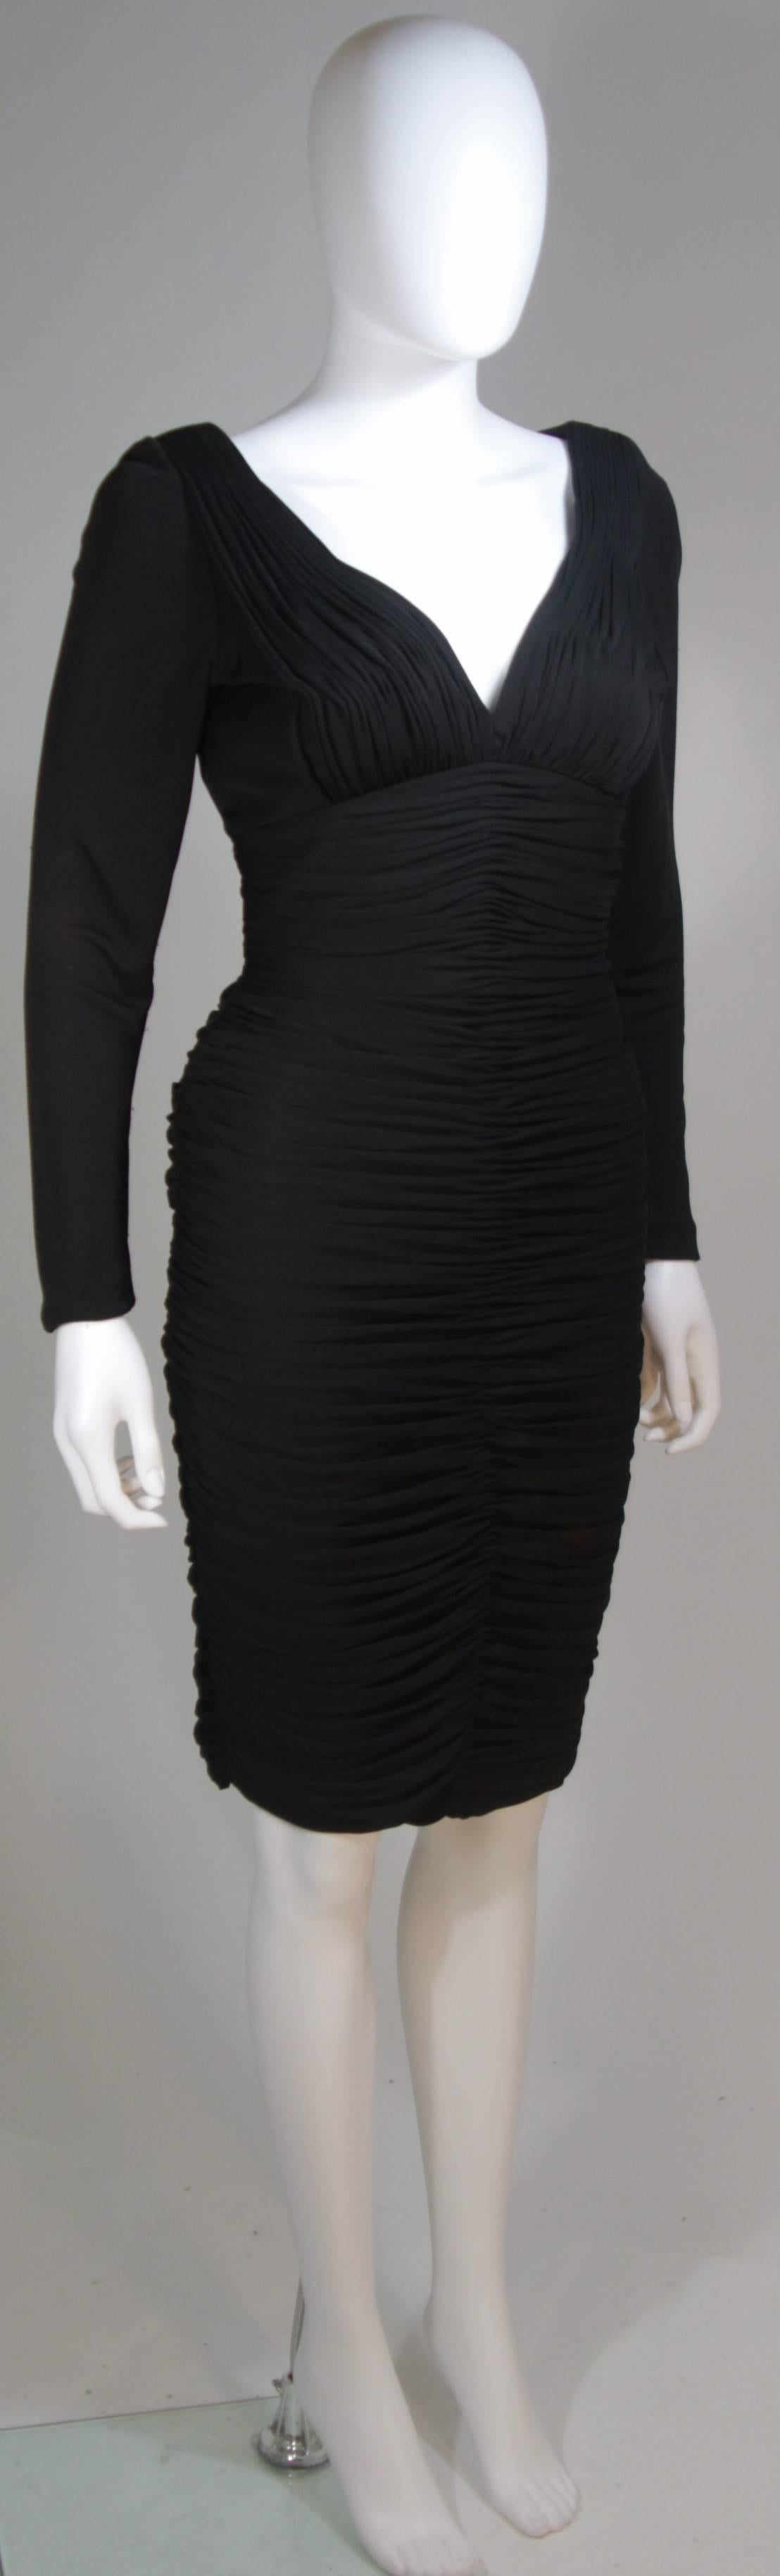 VICKY TIEL Black Long Sleeve Rouched Jersey Cocktail Dress Size 4-6 In Excellent Condition For Sale In Los Angeles, CA